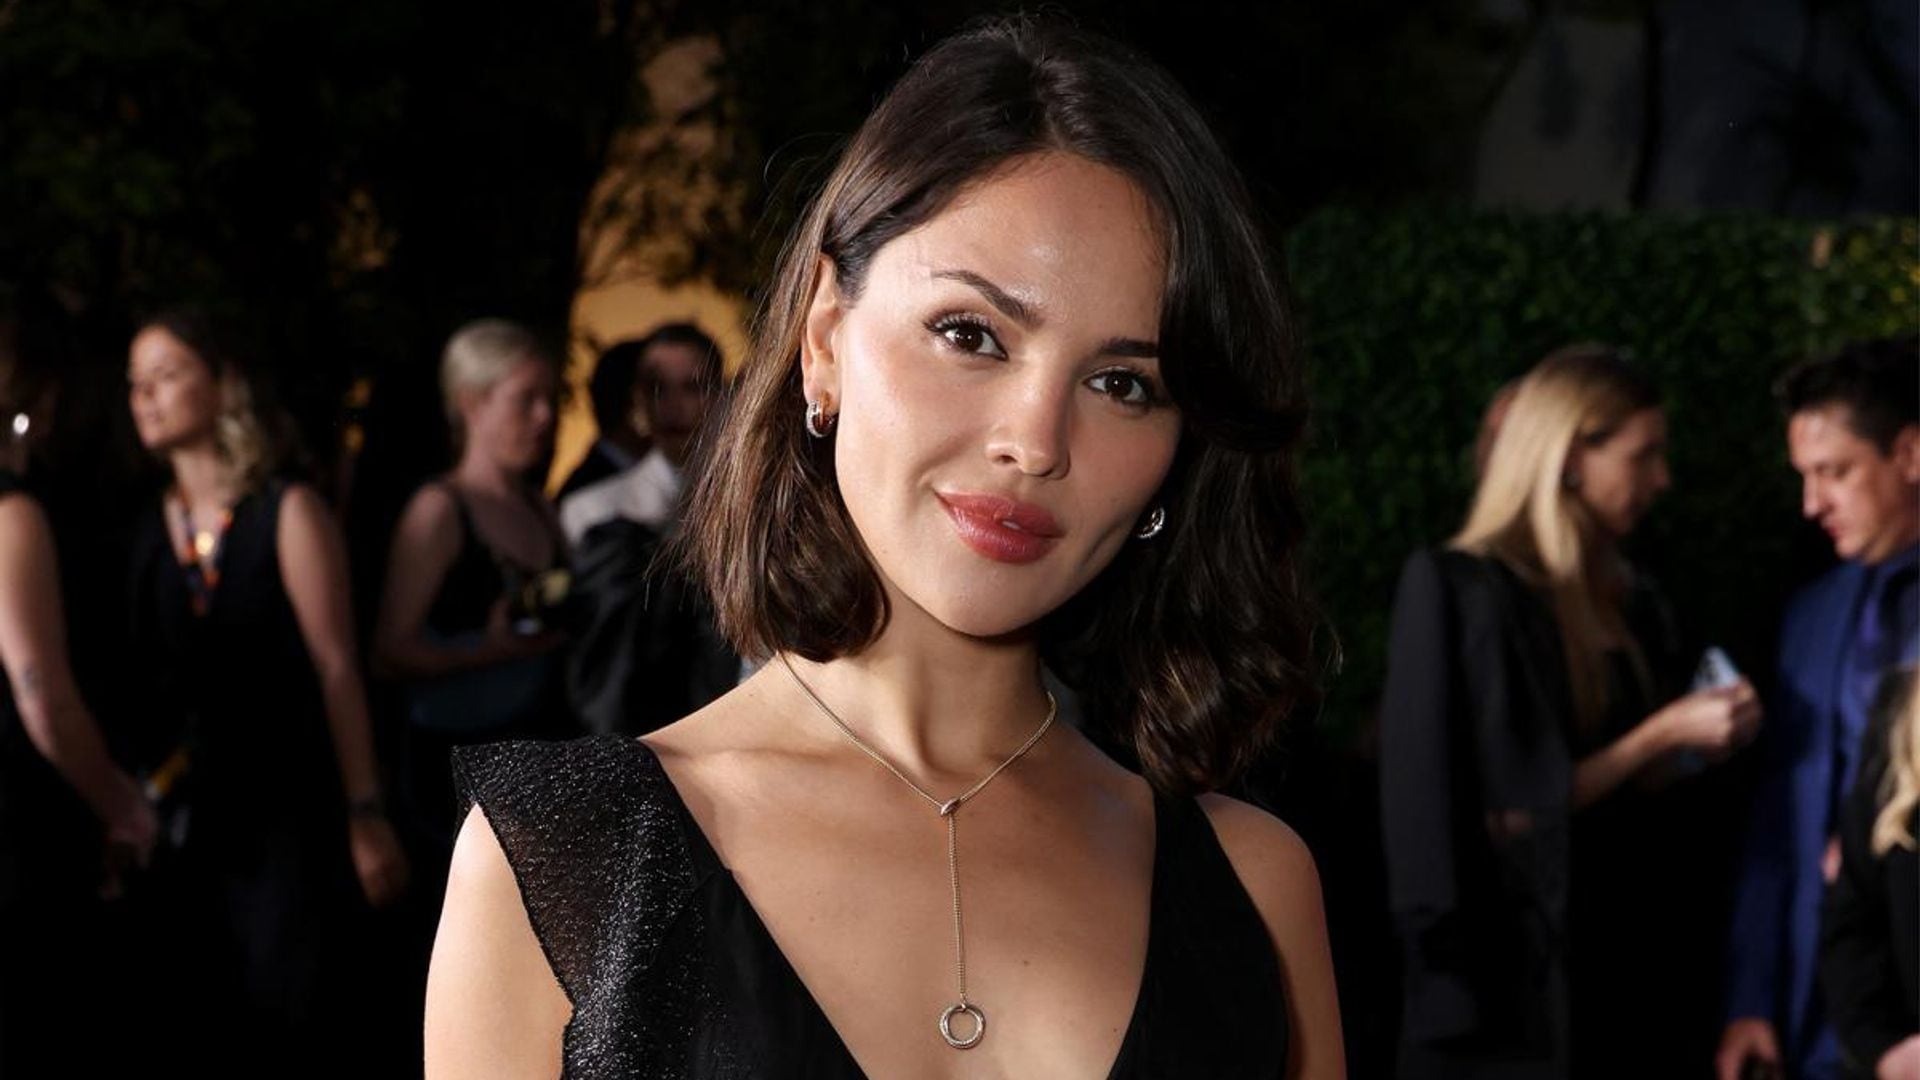 Eiza Gonzalez and Naomi Campbell's sweet moment at private party in London